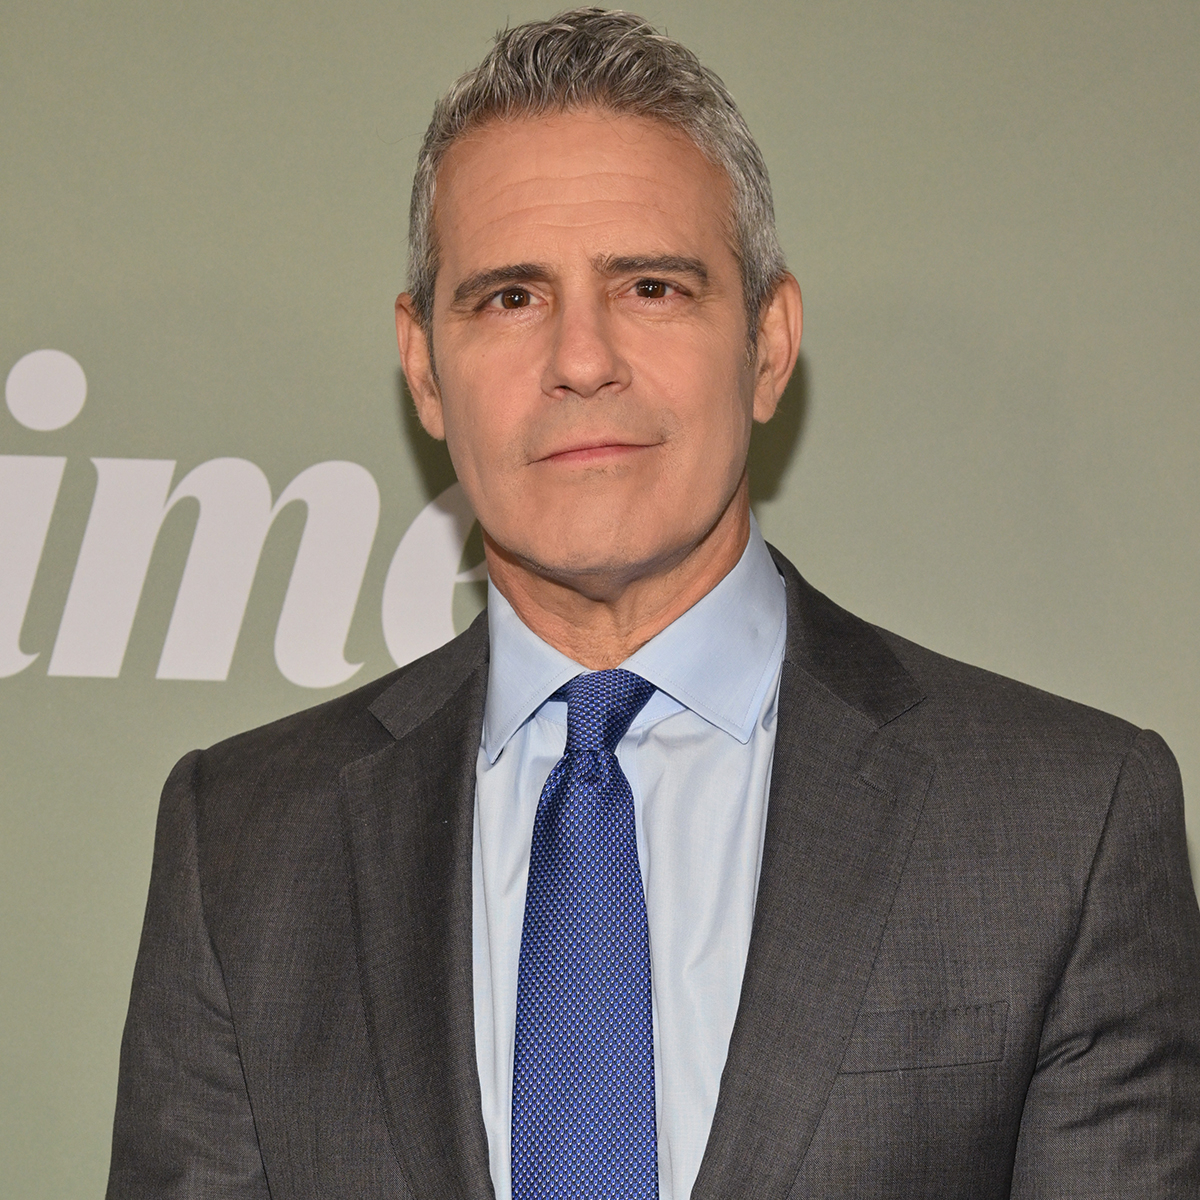 Andy Cohen Says VPR Reunion Will Upset “Every Woman in America”